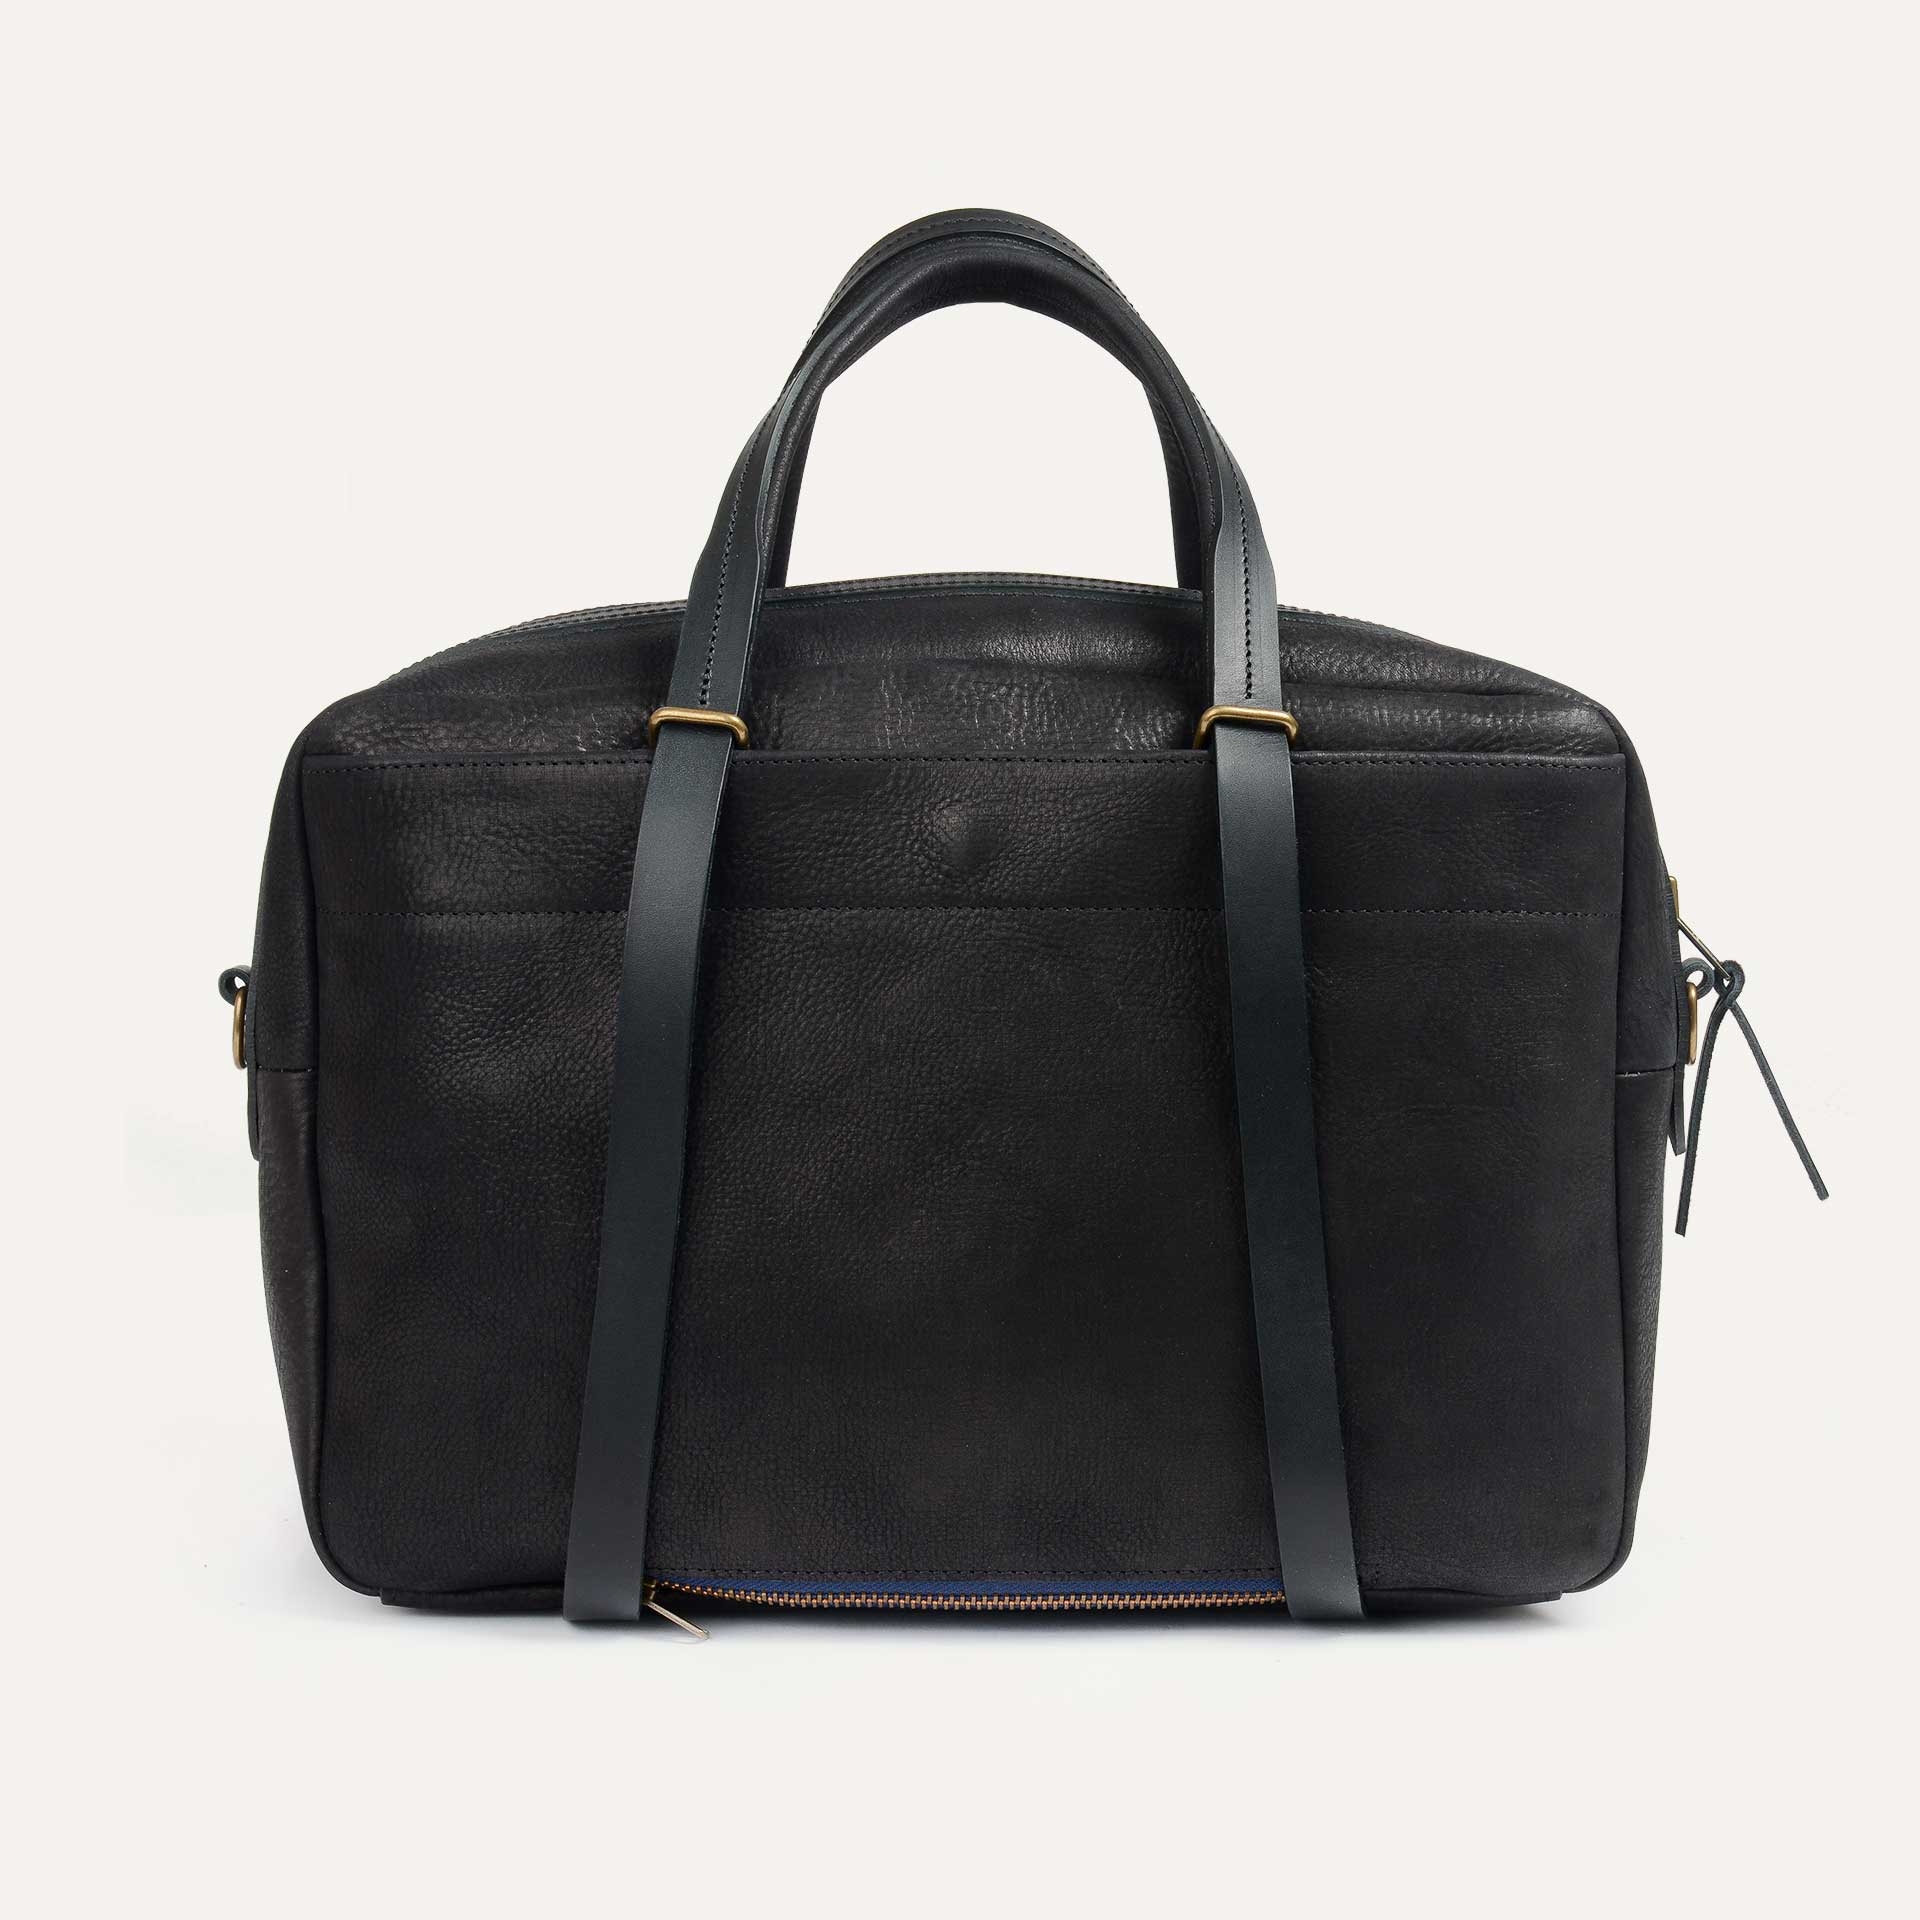 Report Business bag - Charcoal black / Waxed Leather (image n°3)